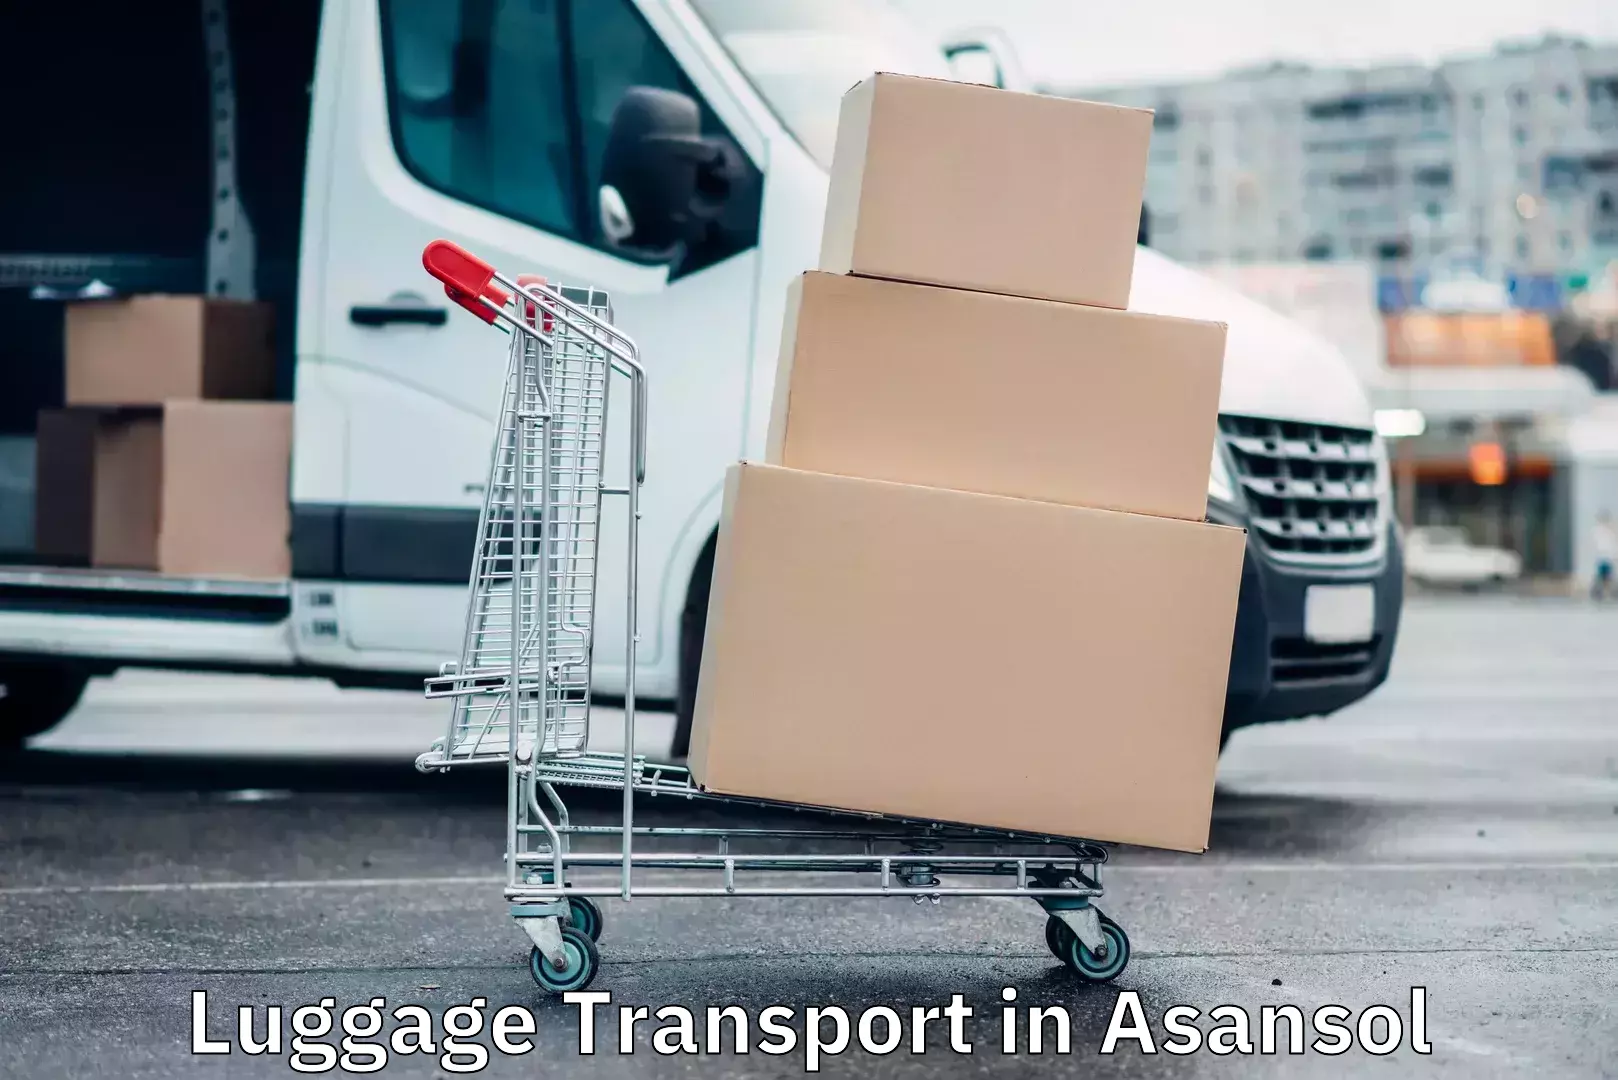 Luggage shipment strategy in Asansol